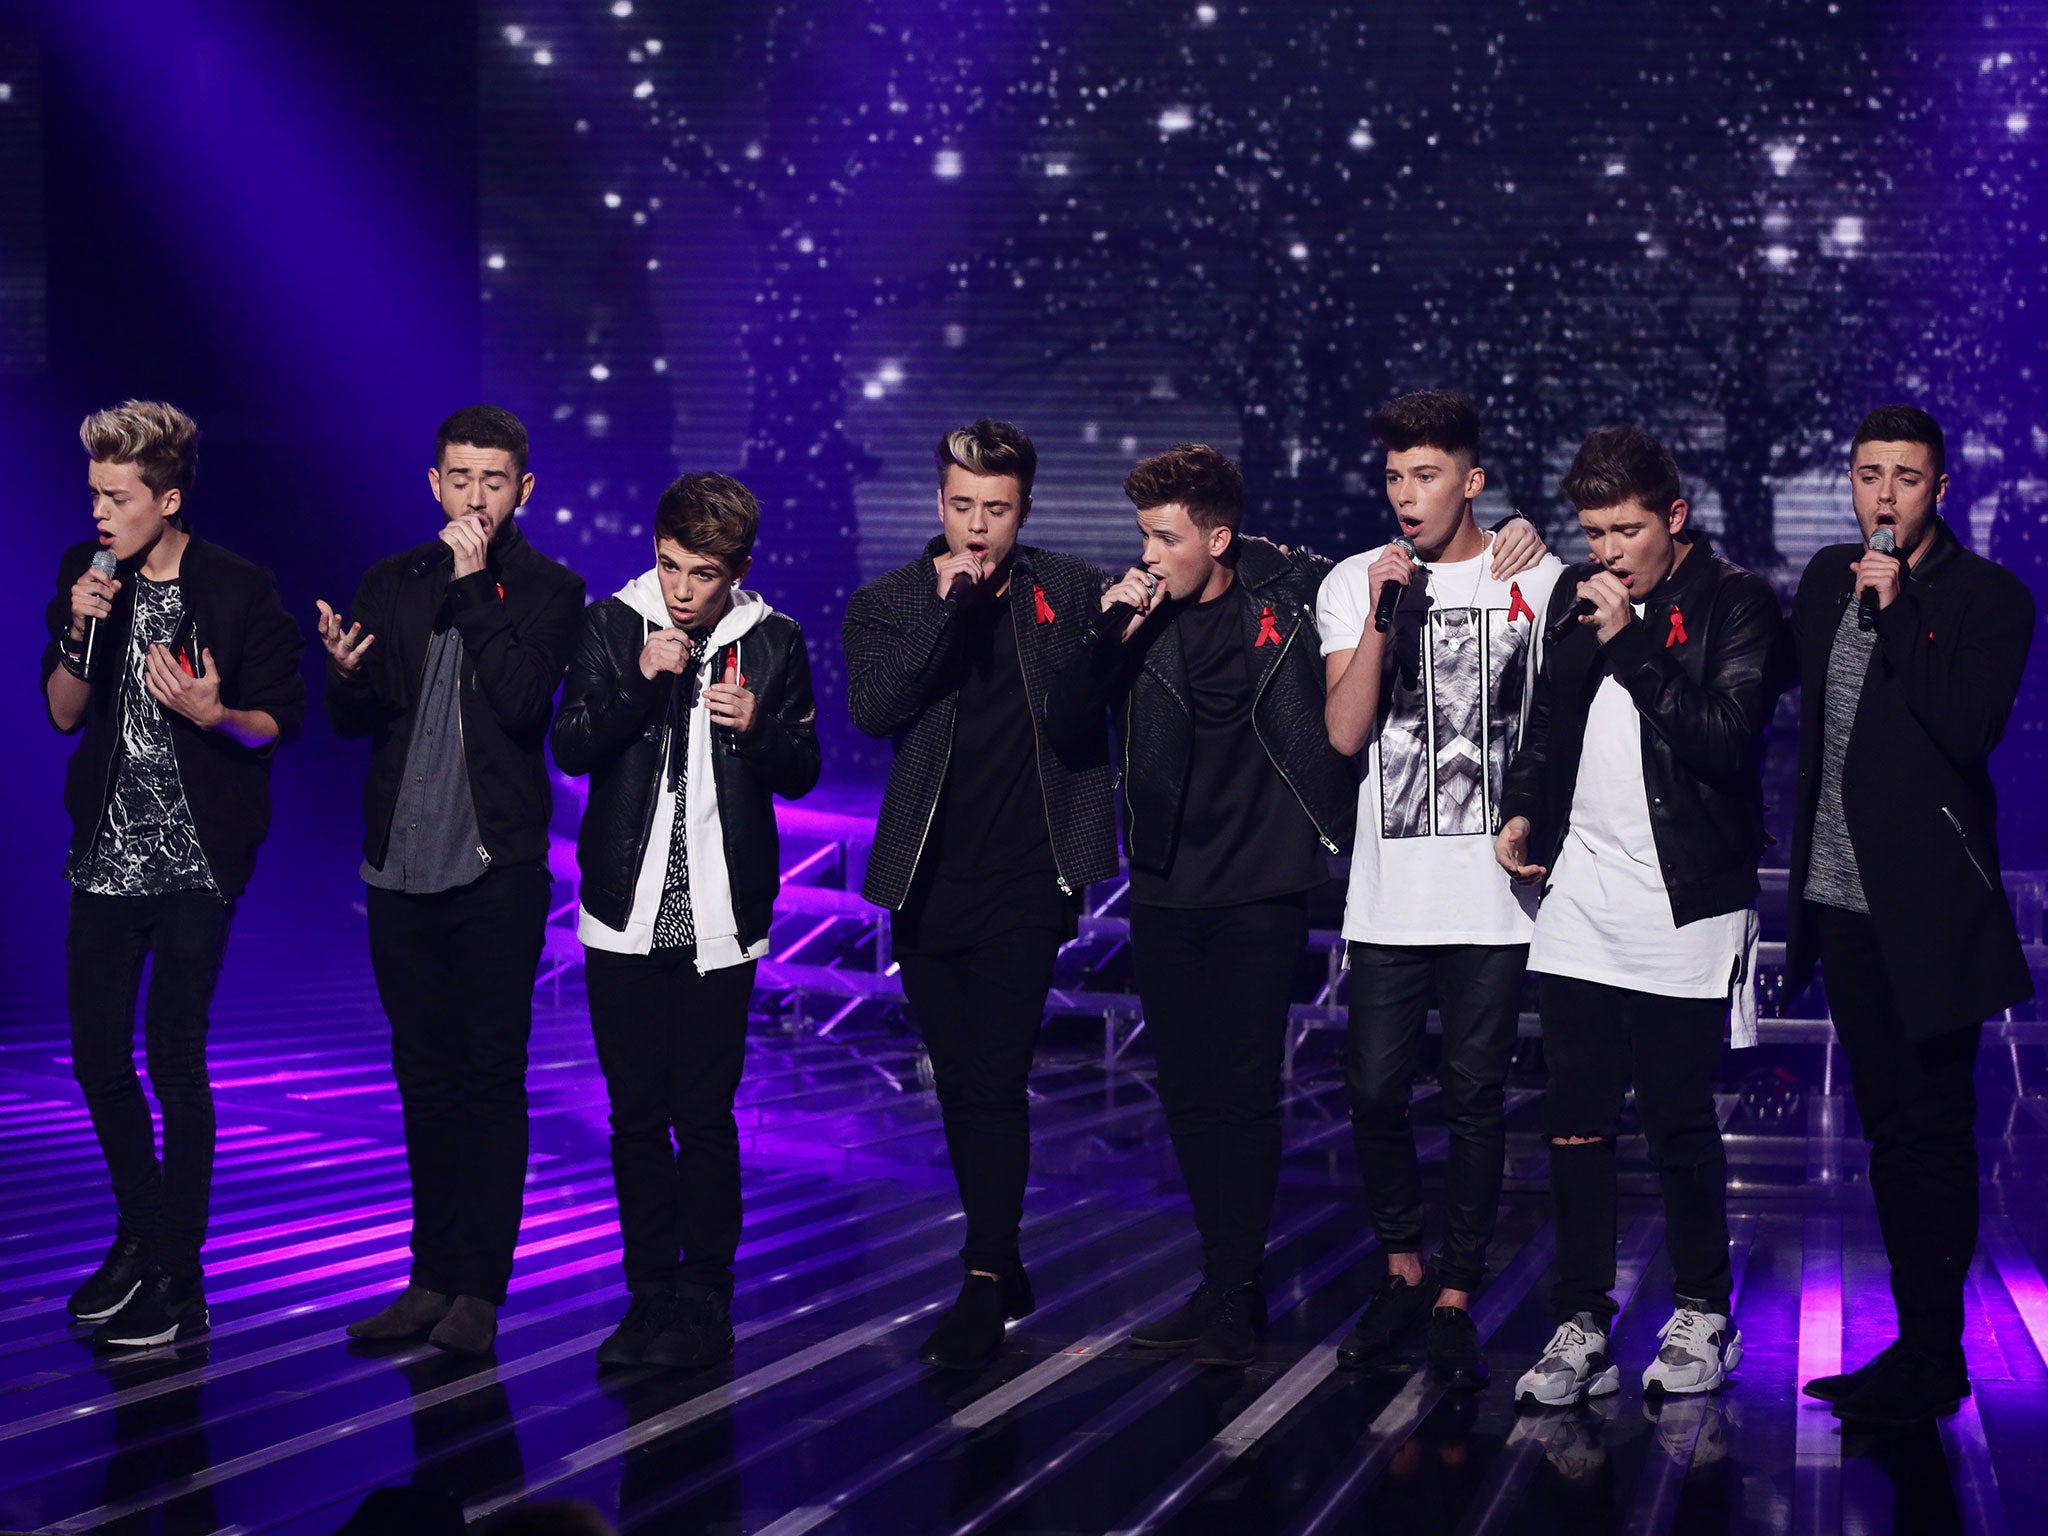 Eight-piece boy band Stereo Kicks have been sent home from the X Factor leaving mentor Louis Walsh without a single act remaining in the competition